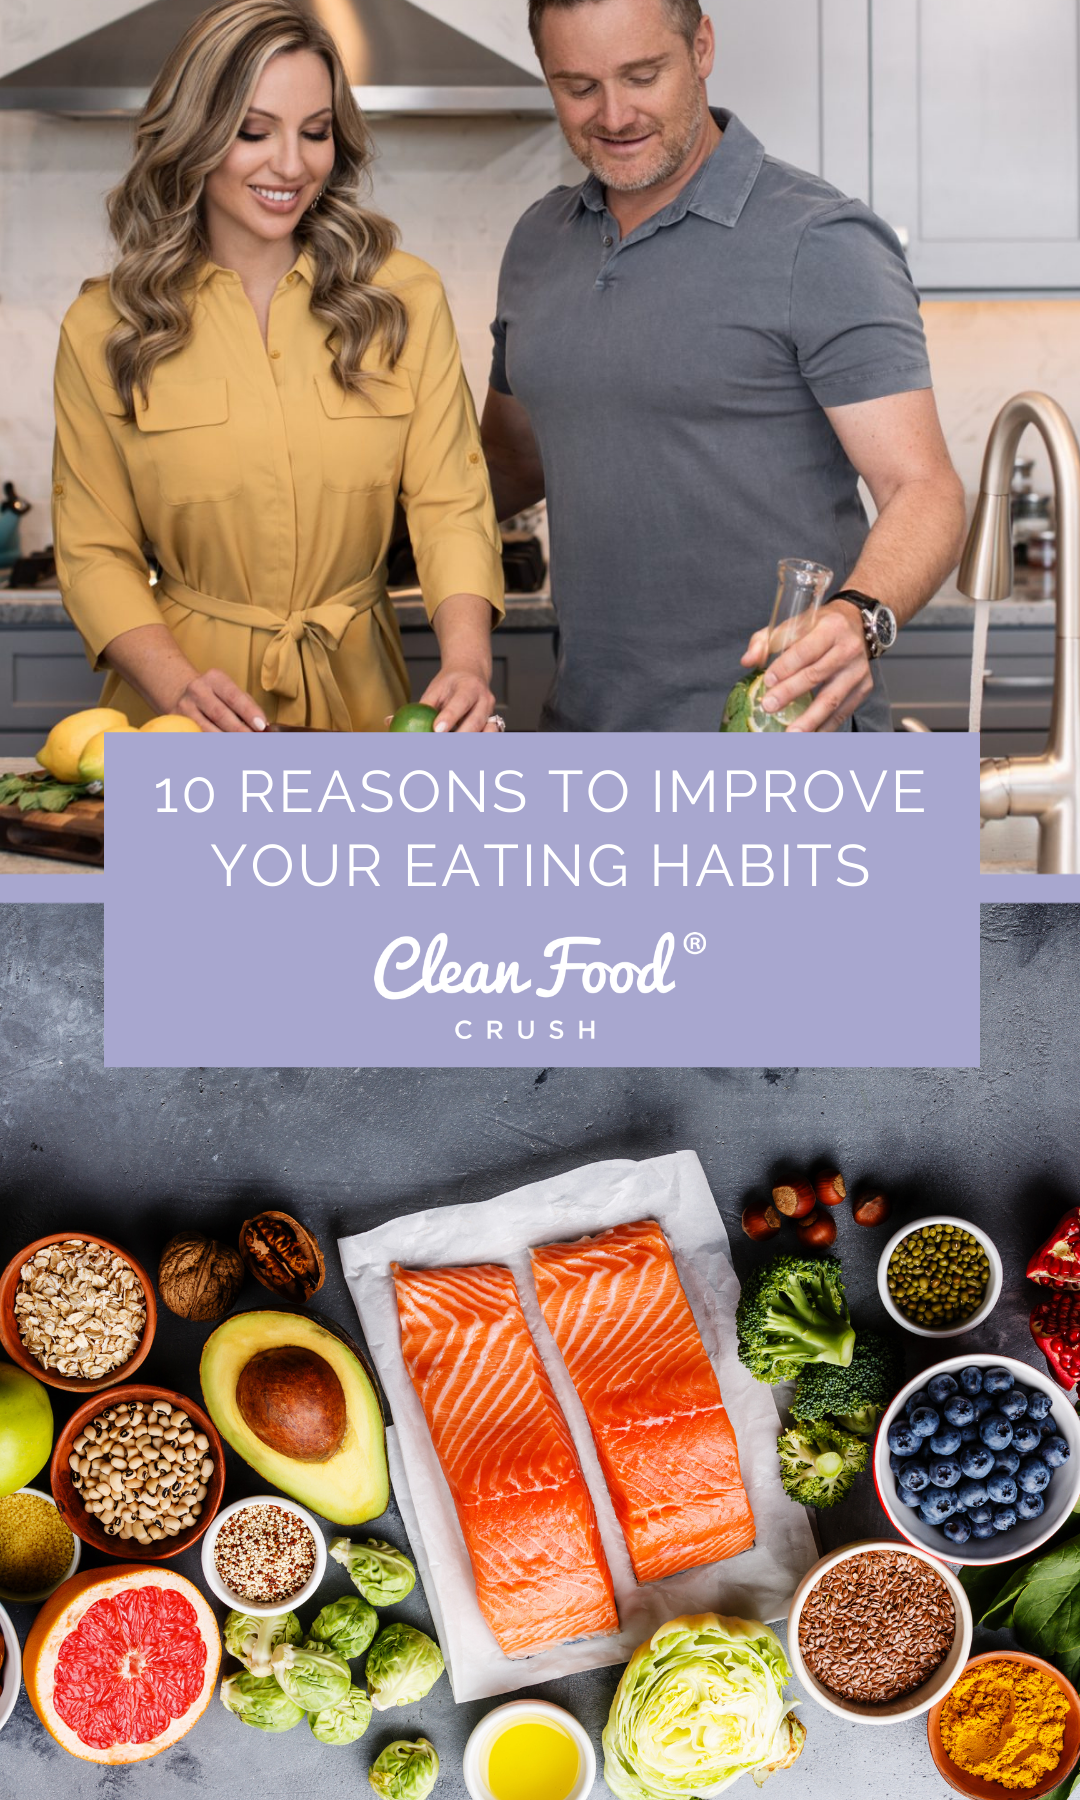 10 Reasons to Improve Your Eating Habits